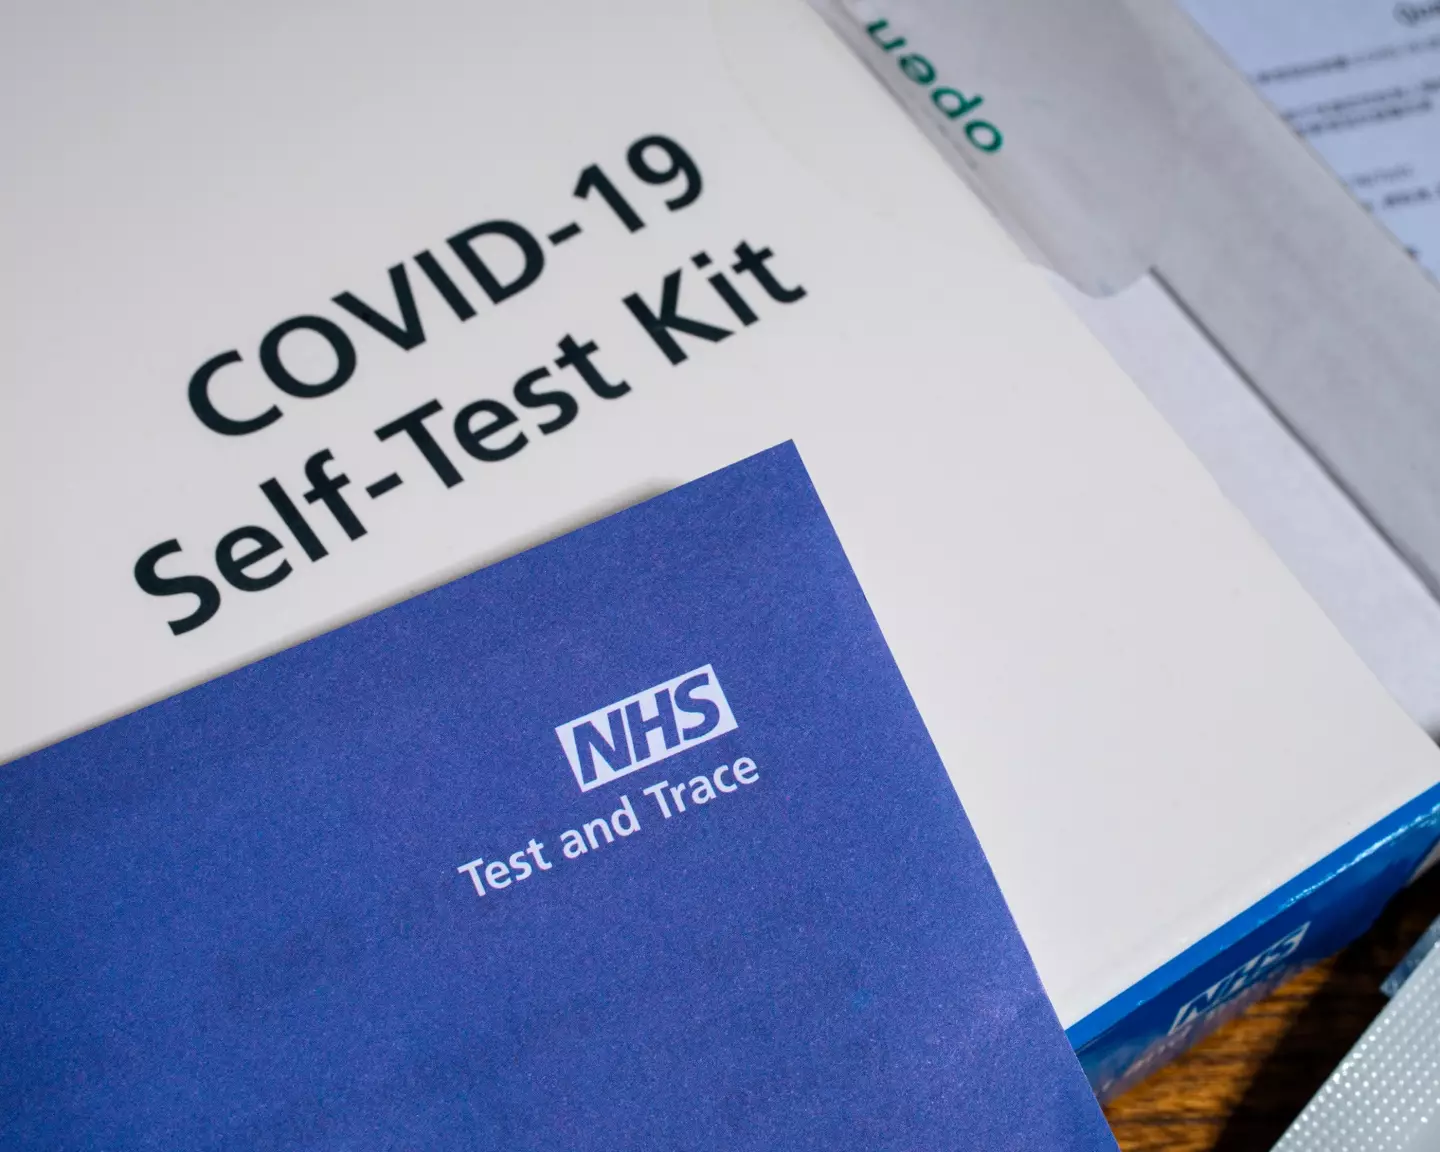 The NHS has updated its list of covid symptoms following the axe of free lateral flow tests (